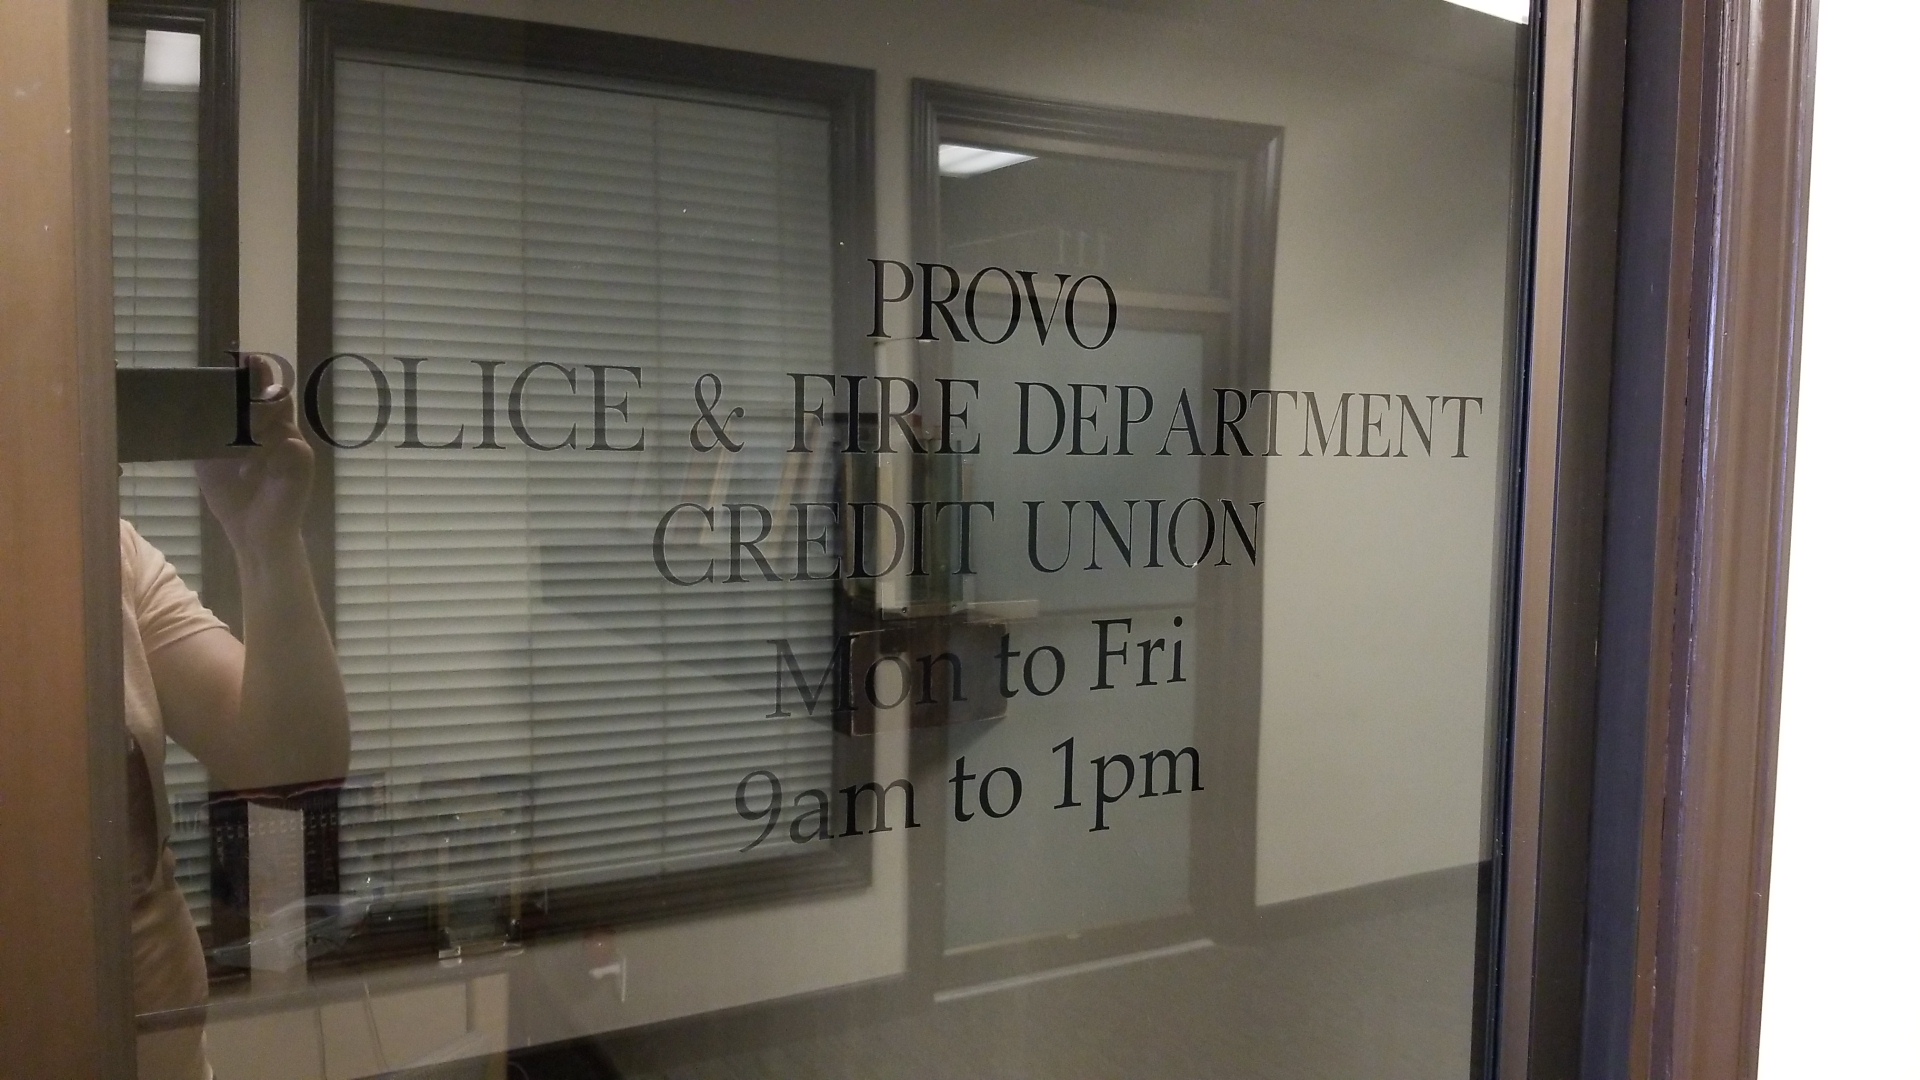 Provo Police and Fire Department Credit Union